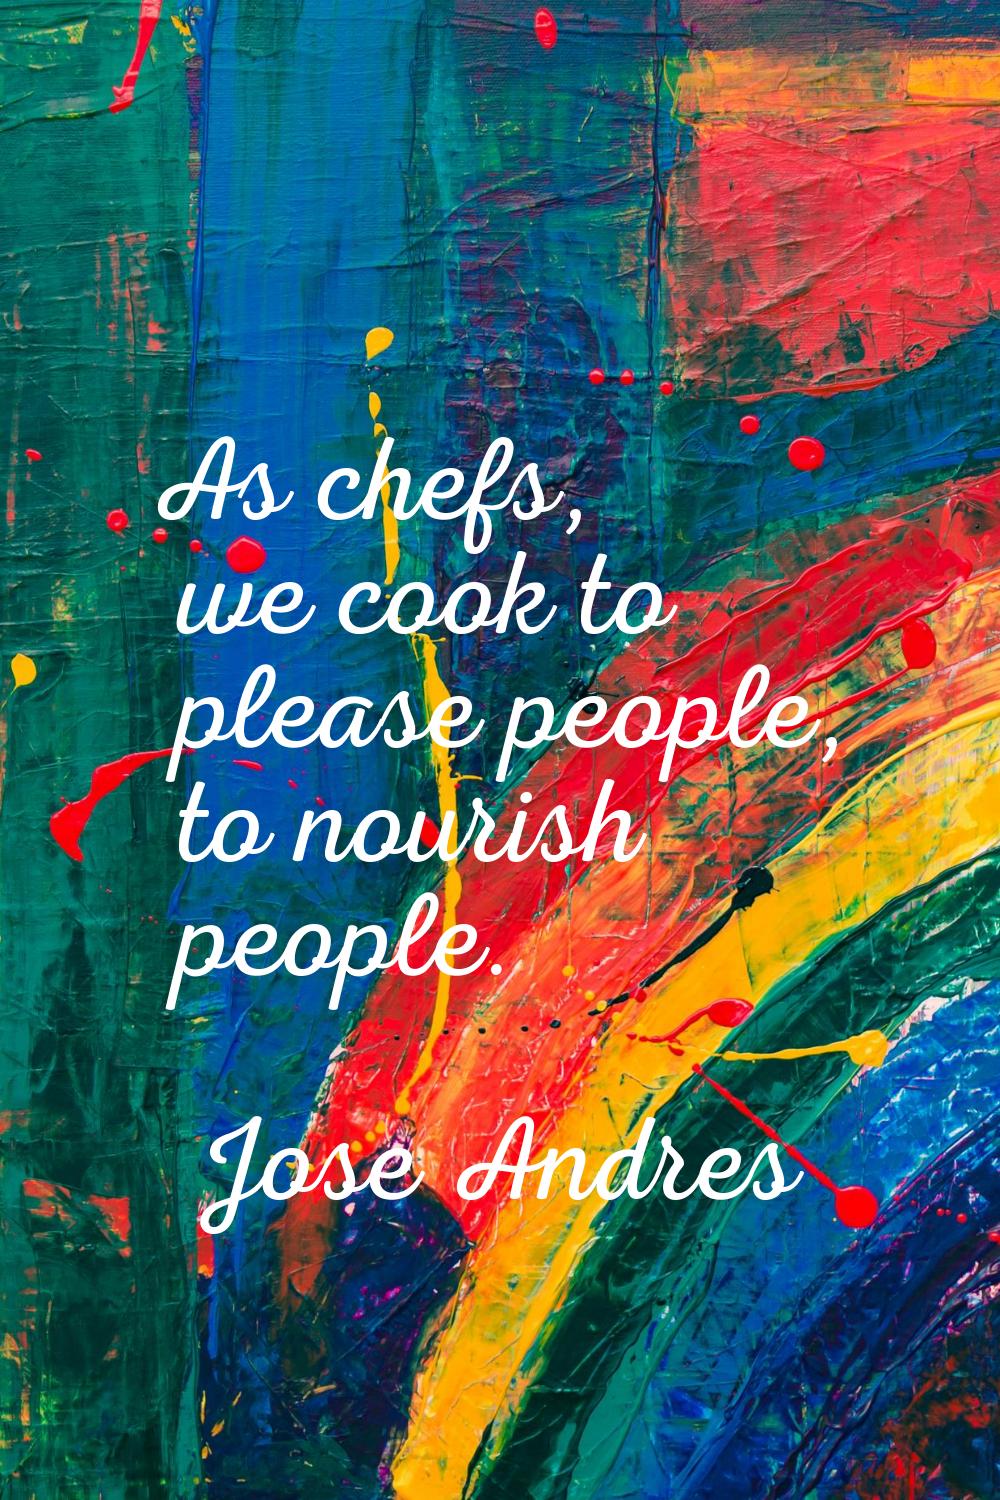 As chefs, we cook to please people, to nourish people.